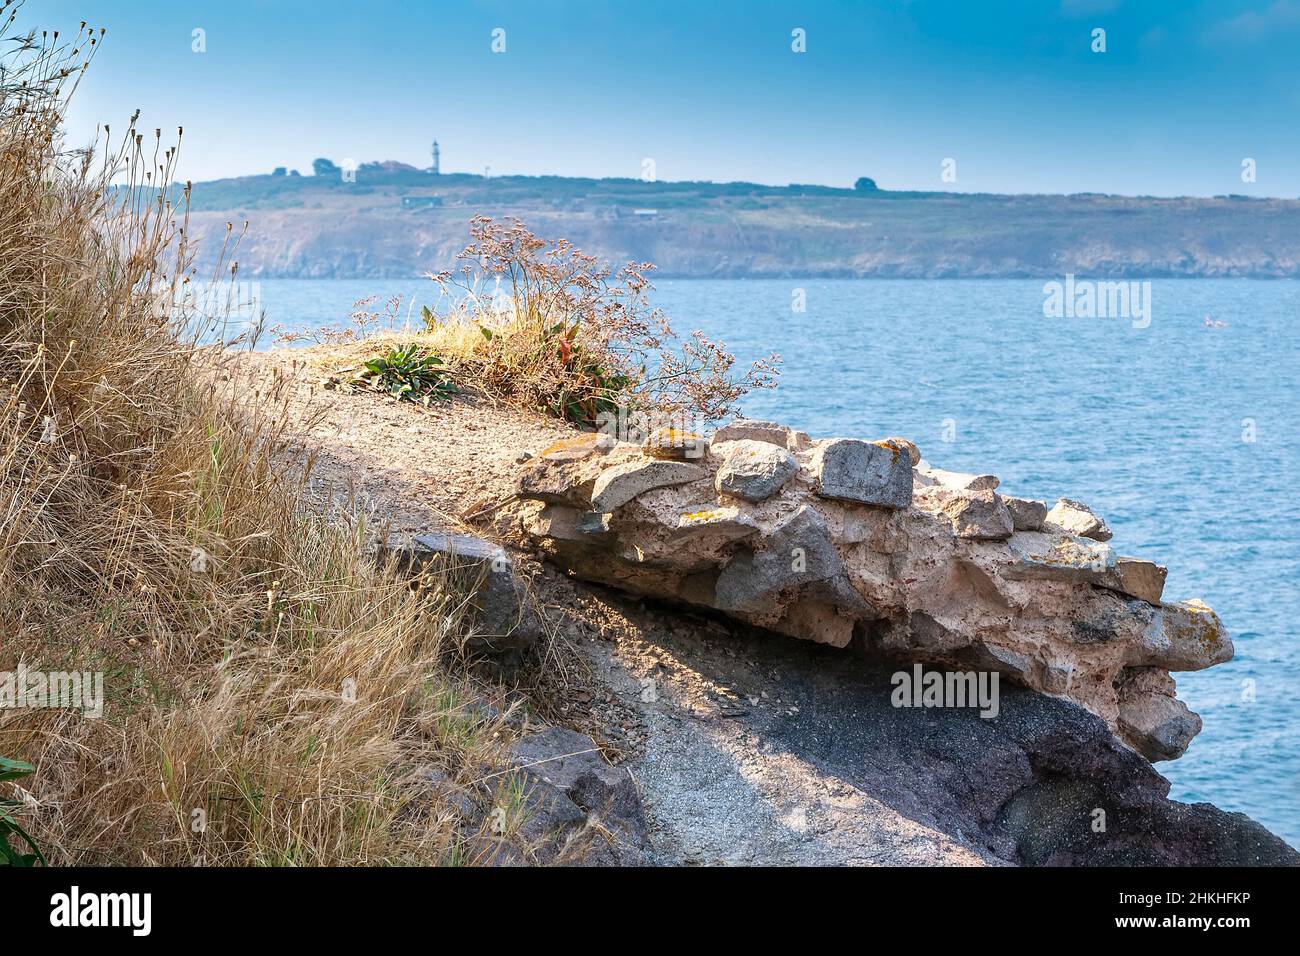 Mountain ledge and path with a fragment of rock and grass against the blue sky and the sea Stock Photo